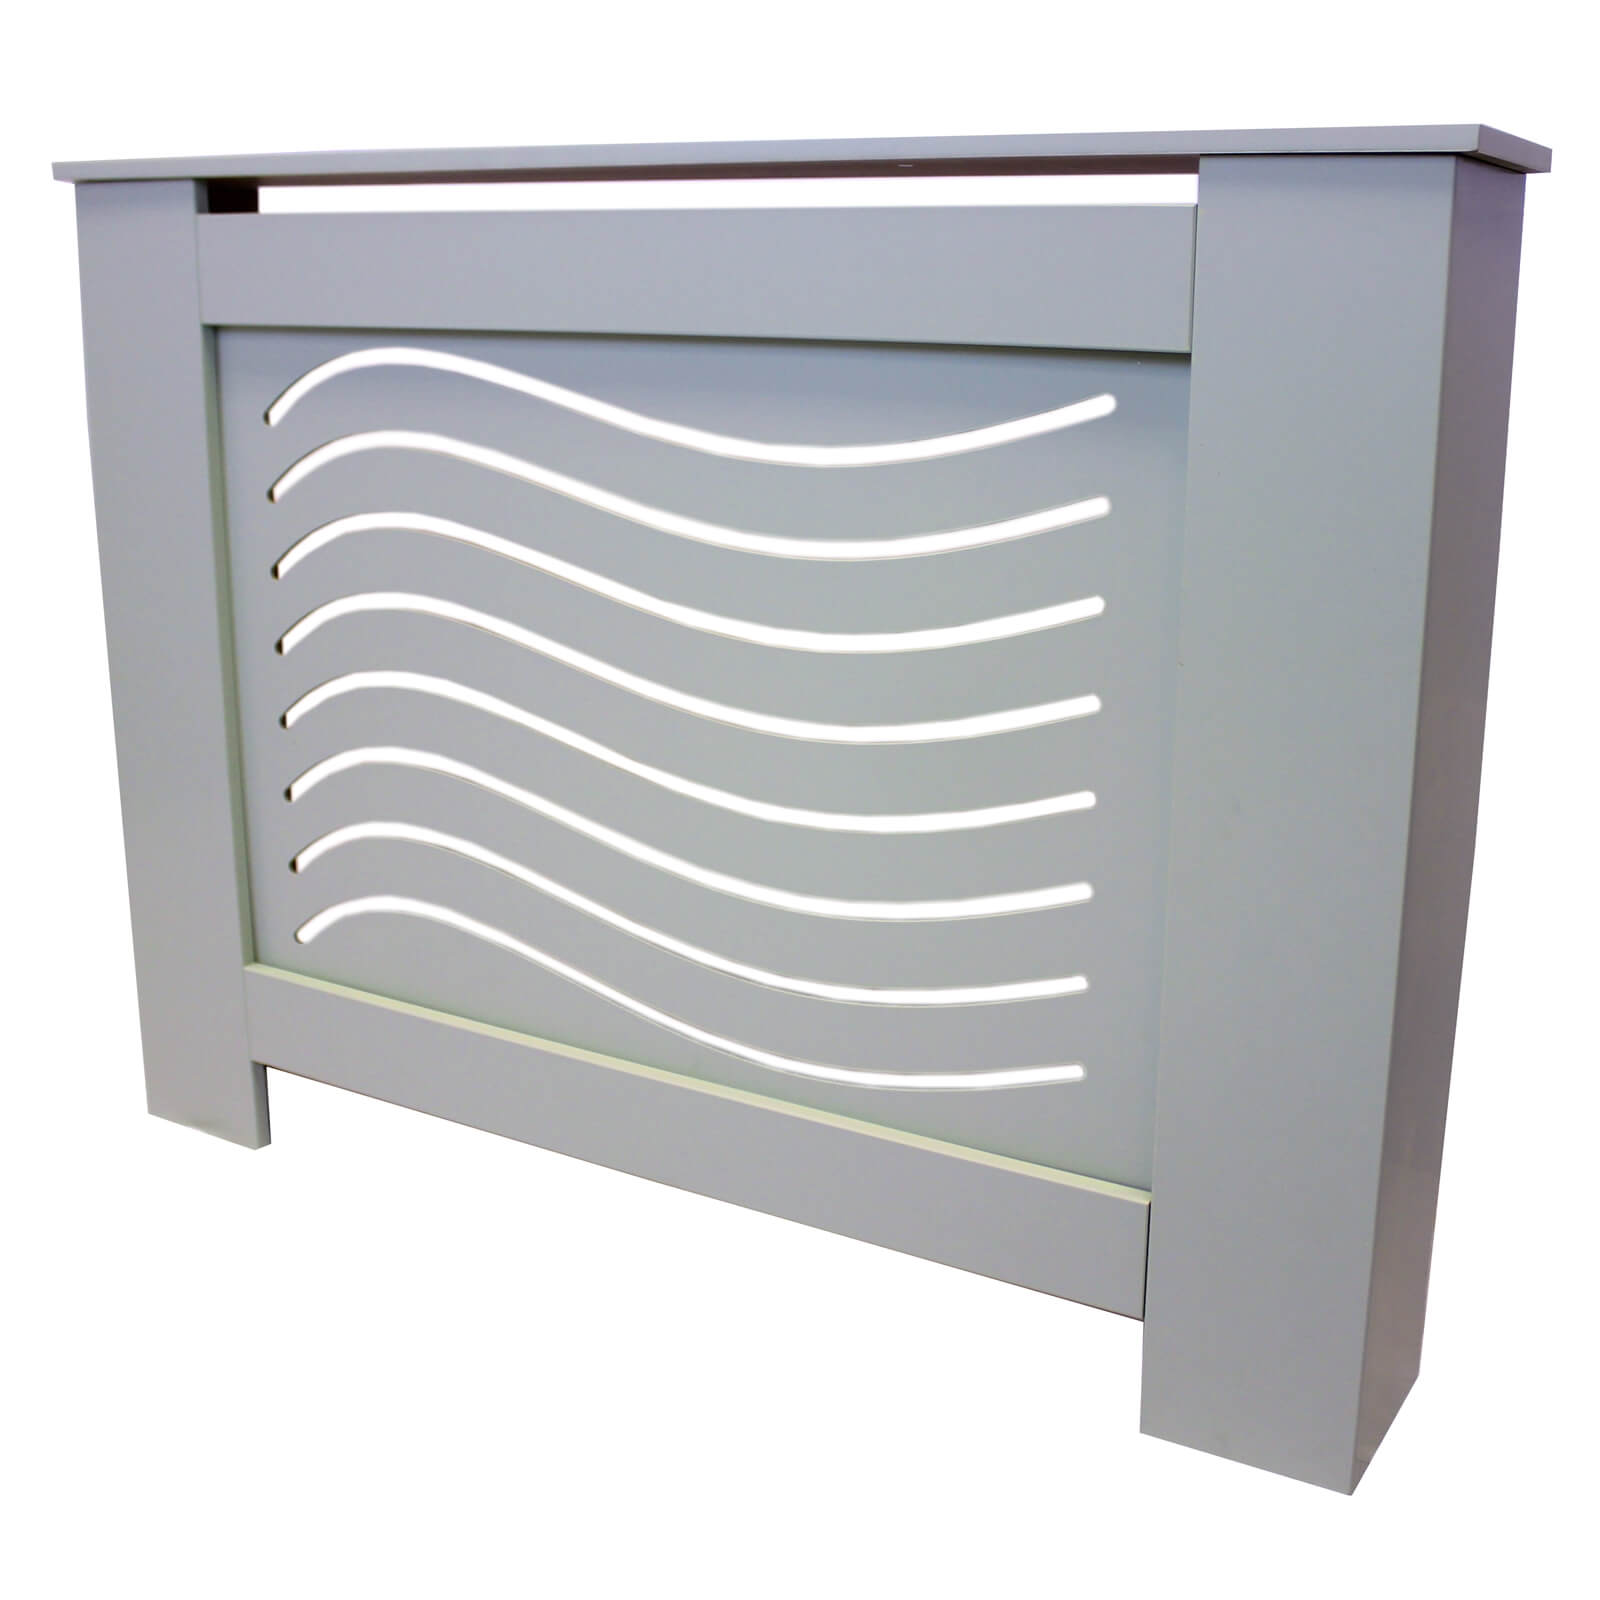 Wave Grey Radiator Cover - Small